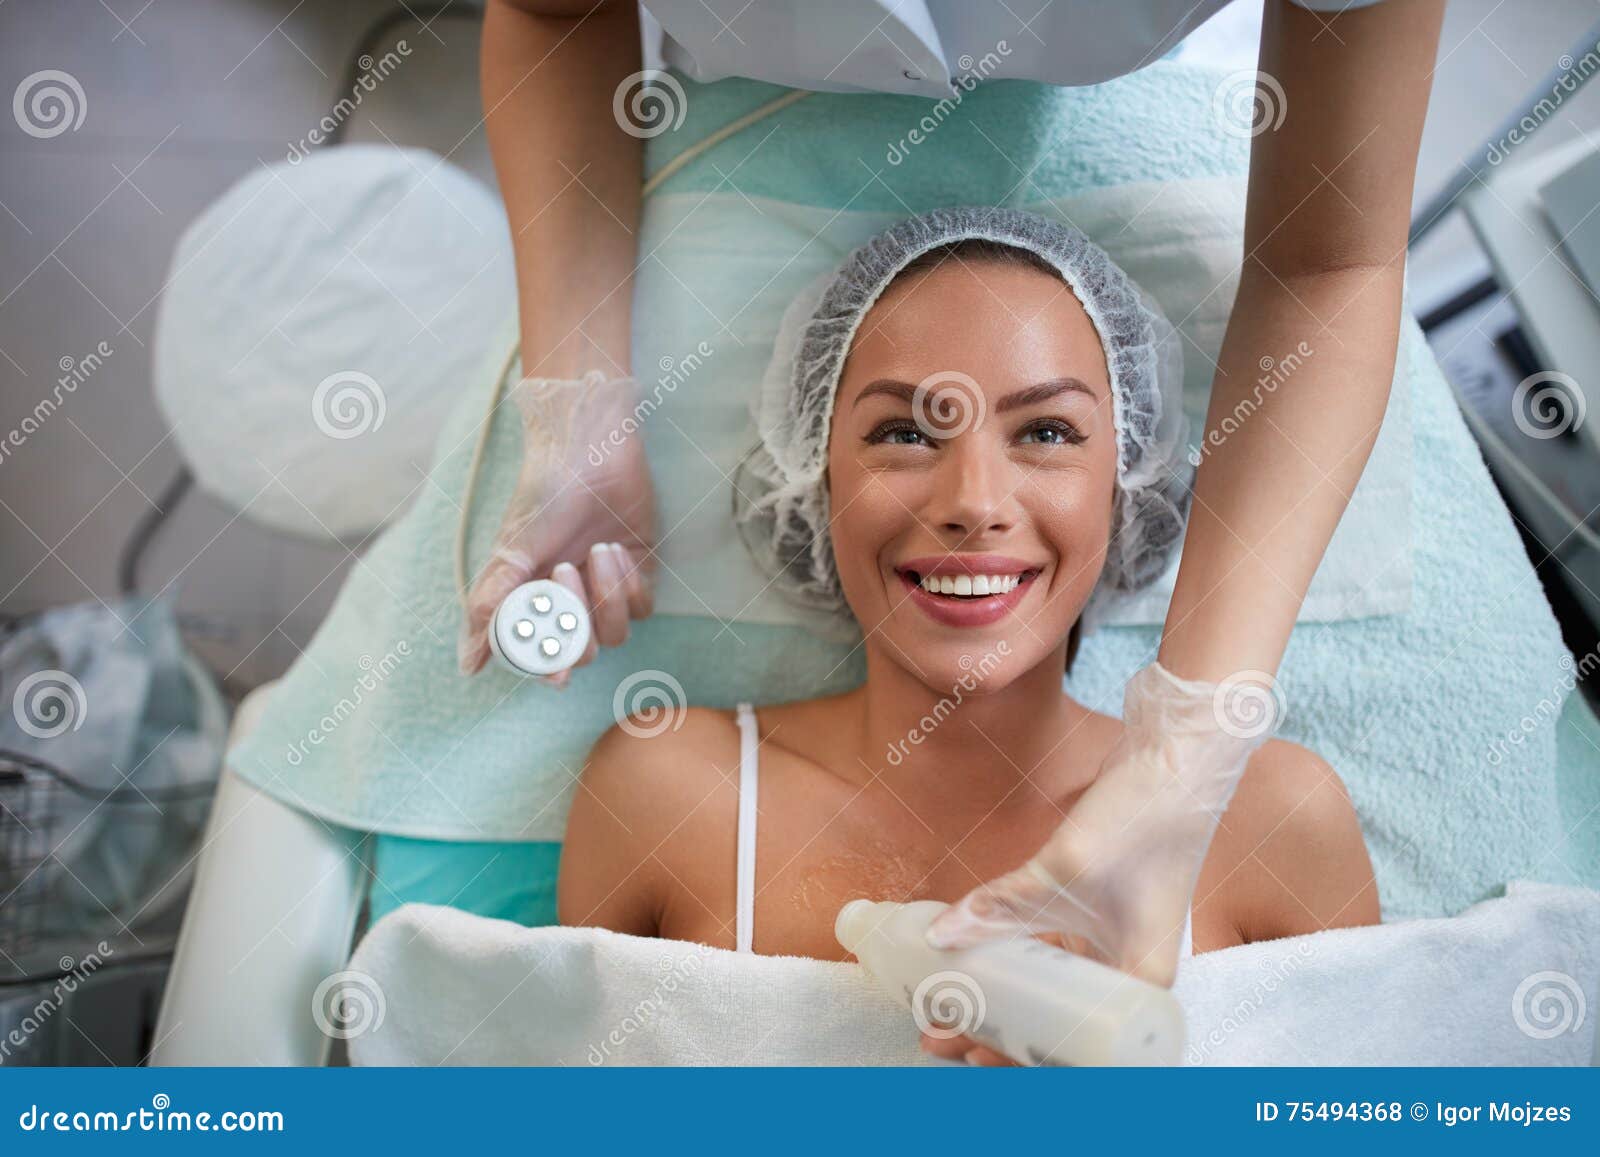 cheerful girl is receiving facial treatment by beautician